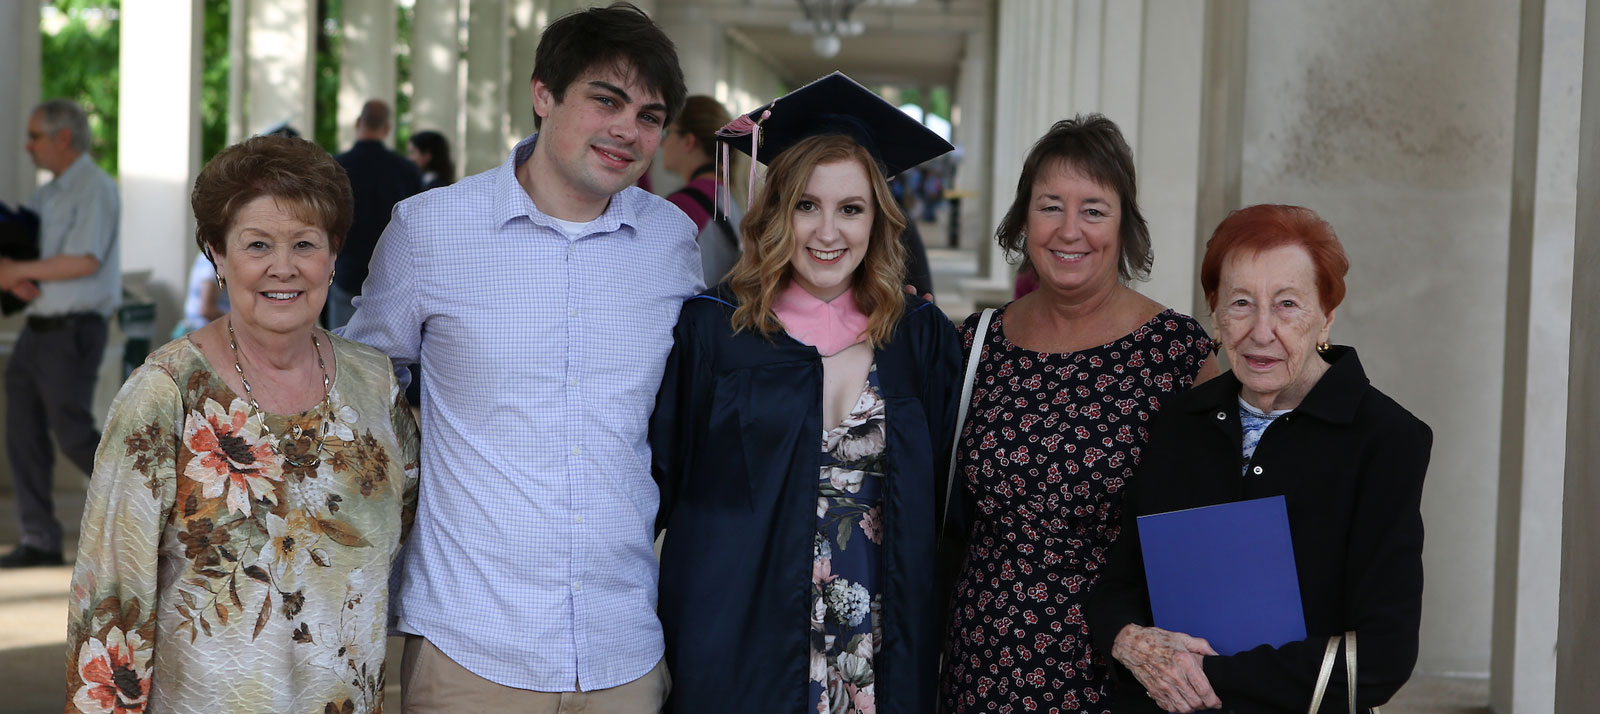 Graduate poses with her family.